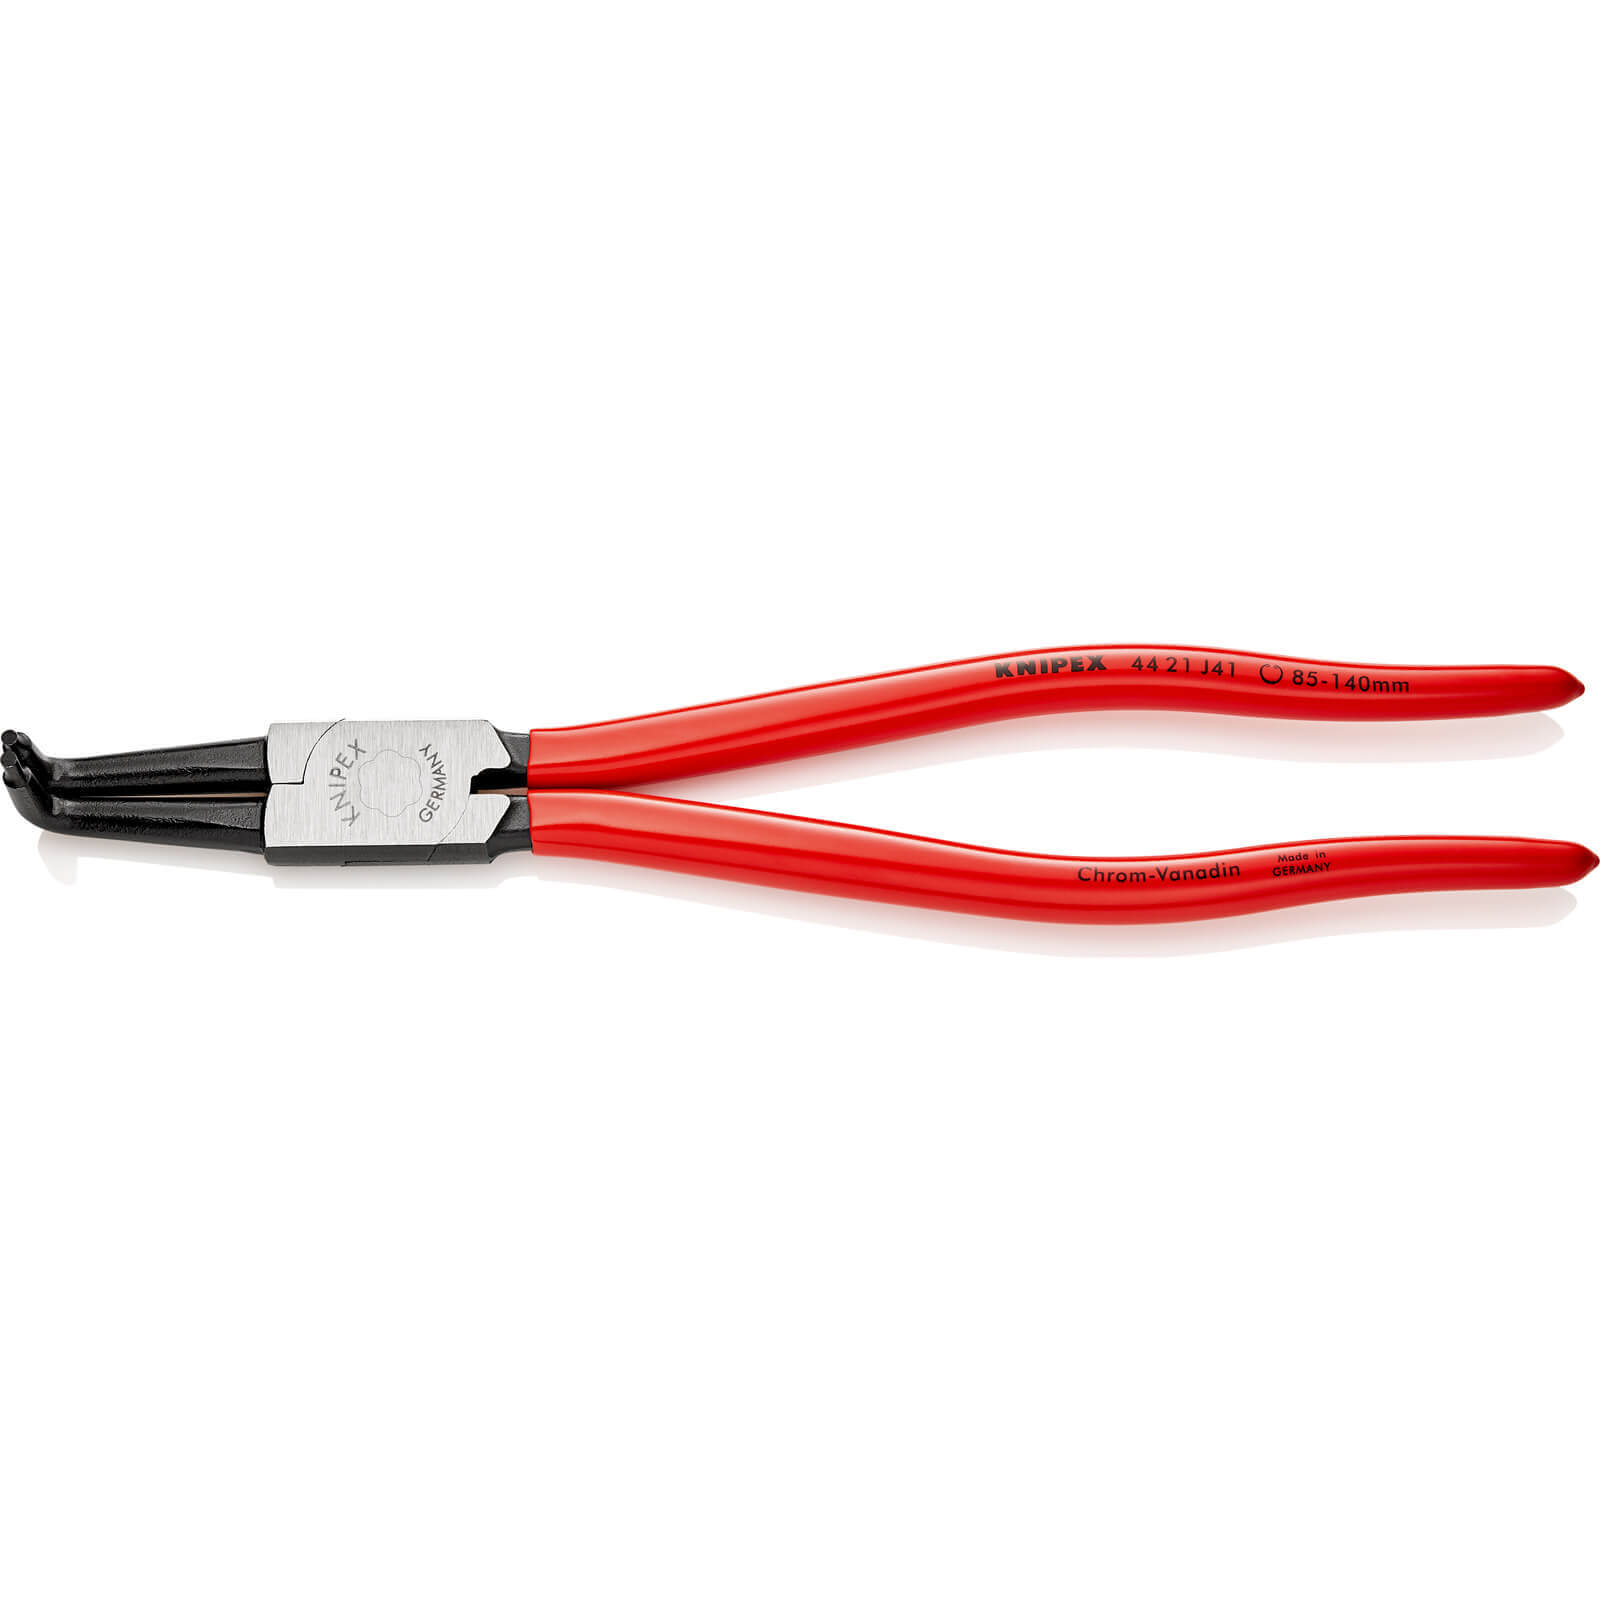 Image of Knipex 44 21 Internal 90 Degree Circlip Pliers 85mm - 140mm